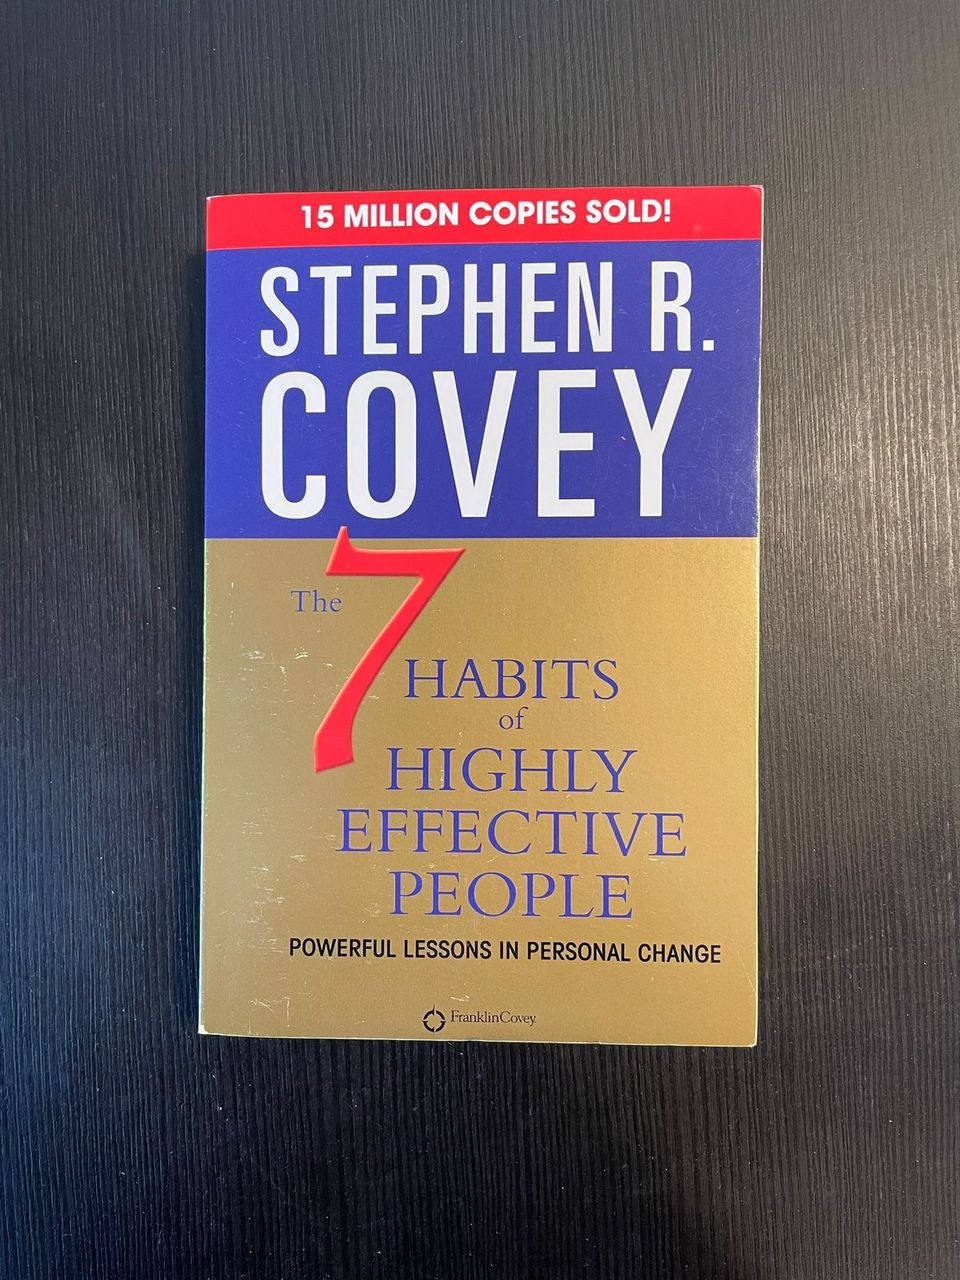 7 Habits for Highly Effective People